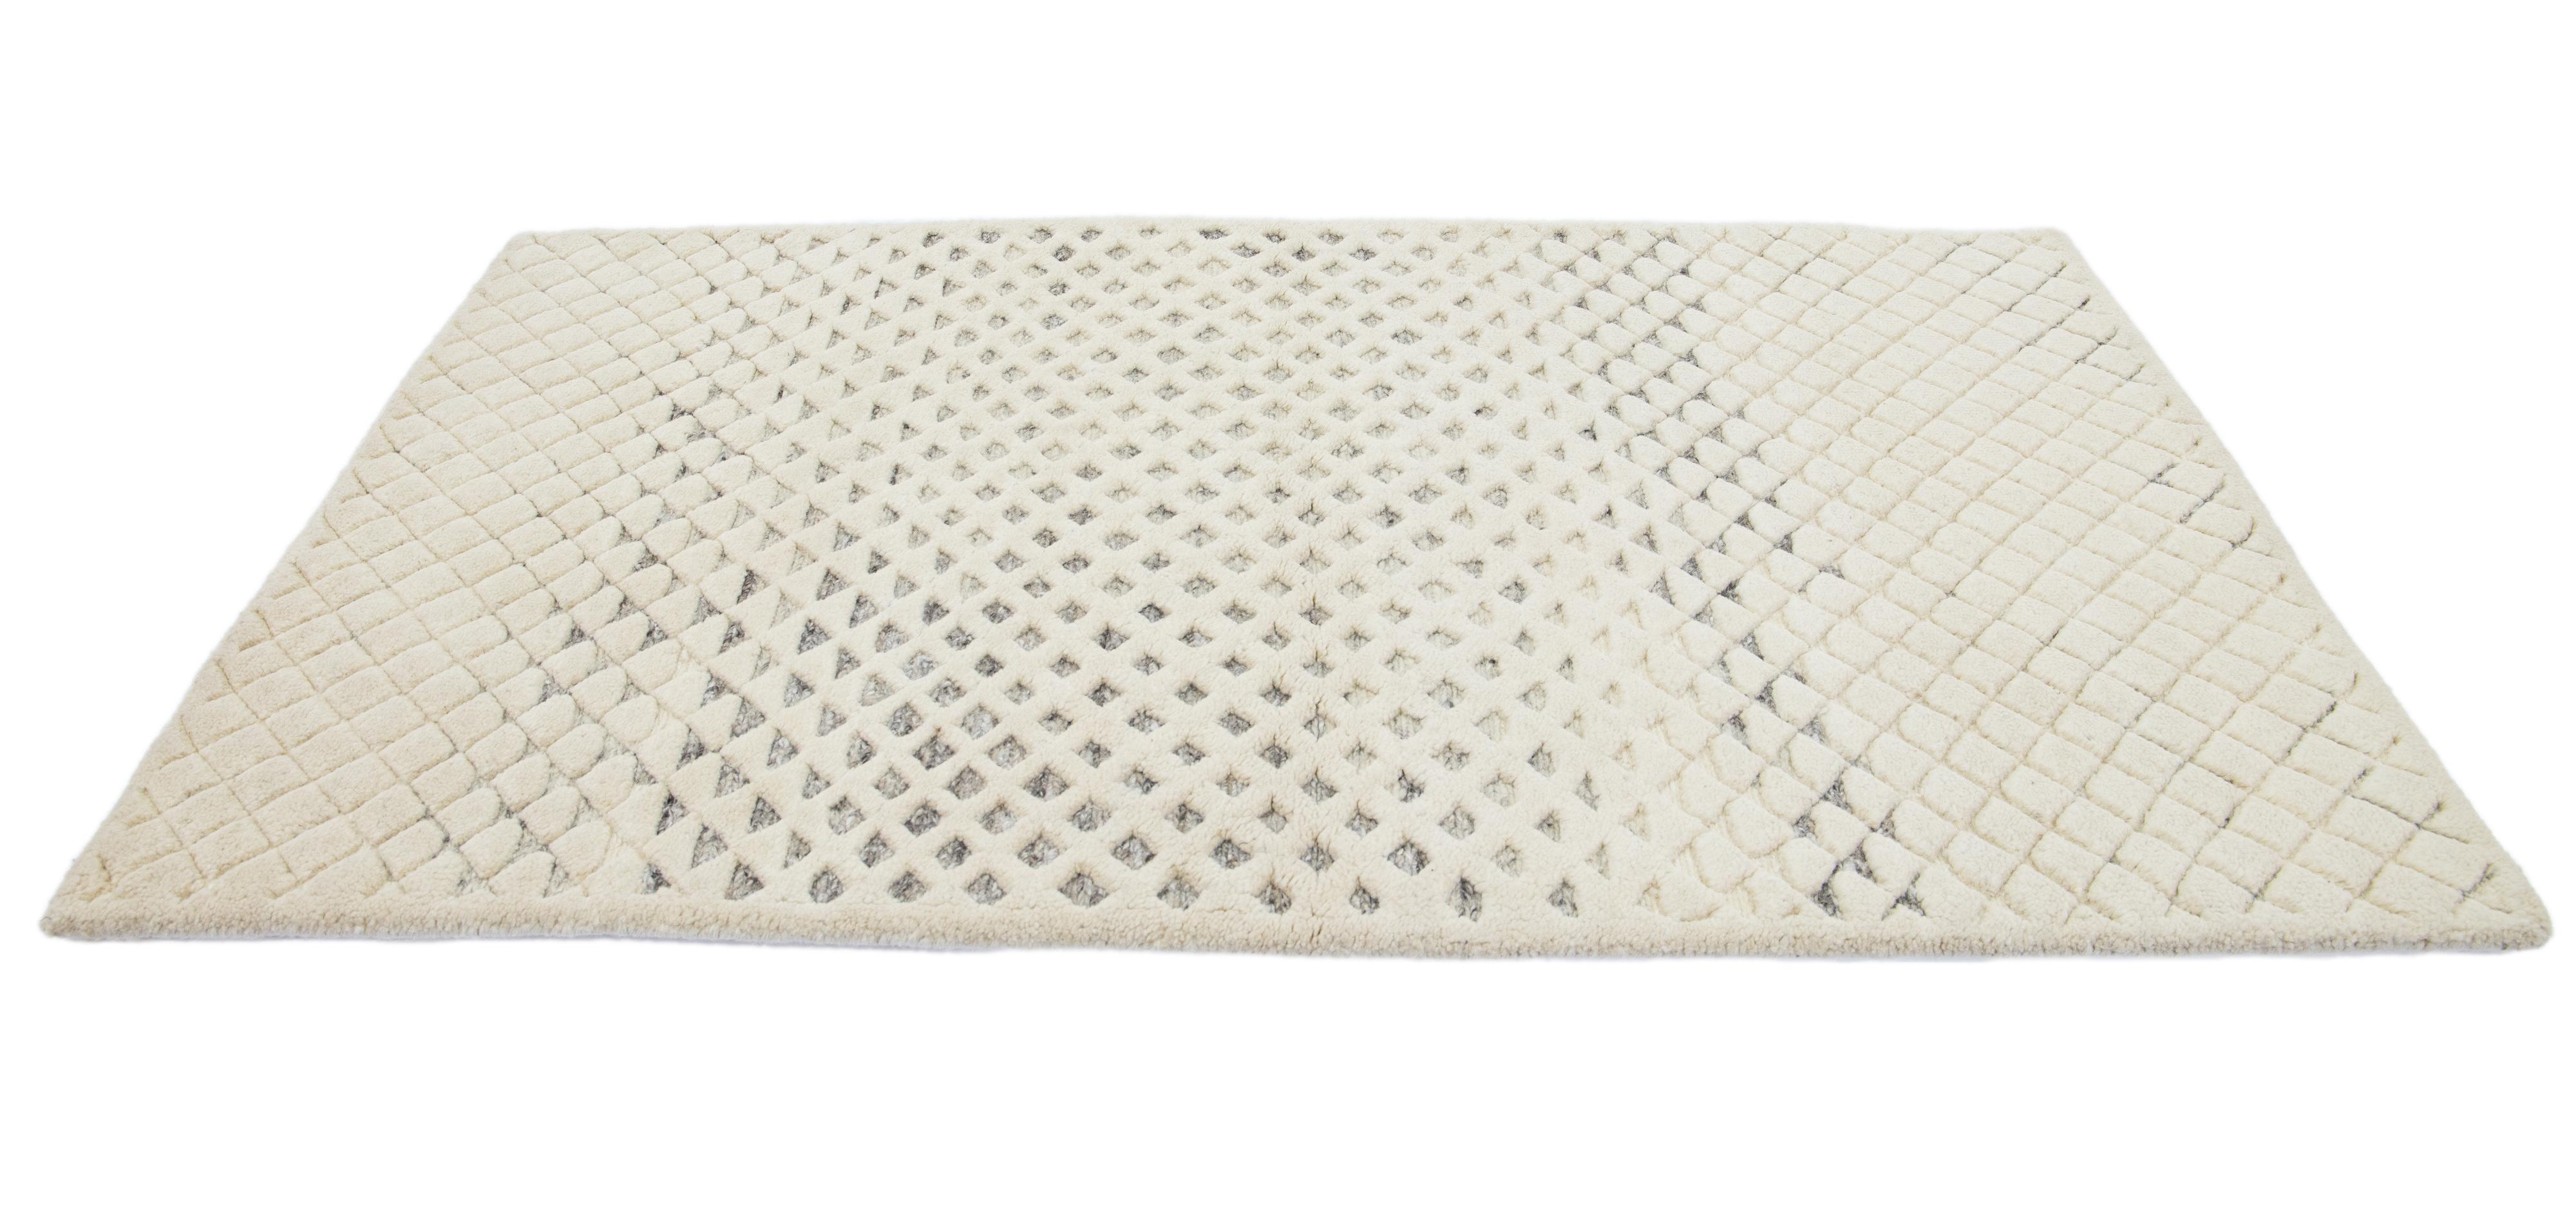 Apadana's Modern Moroccan style wool custom rug. Custom sizes and colors made-to-order. 

Material: Wool 
Techniques: hand-knotted
Style: Moroccan 
Lead time: approx. 15-16 wks available 
Colors: as shown, other custom colors are available.